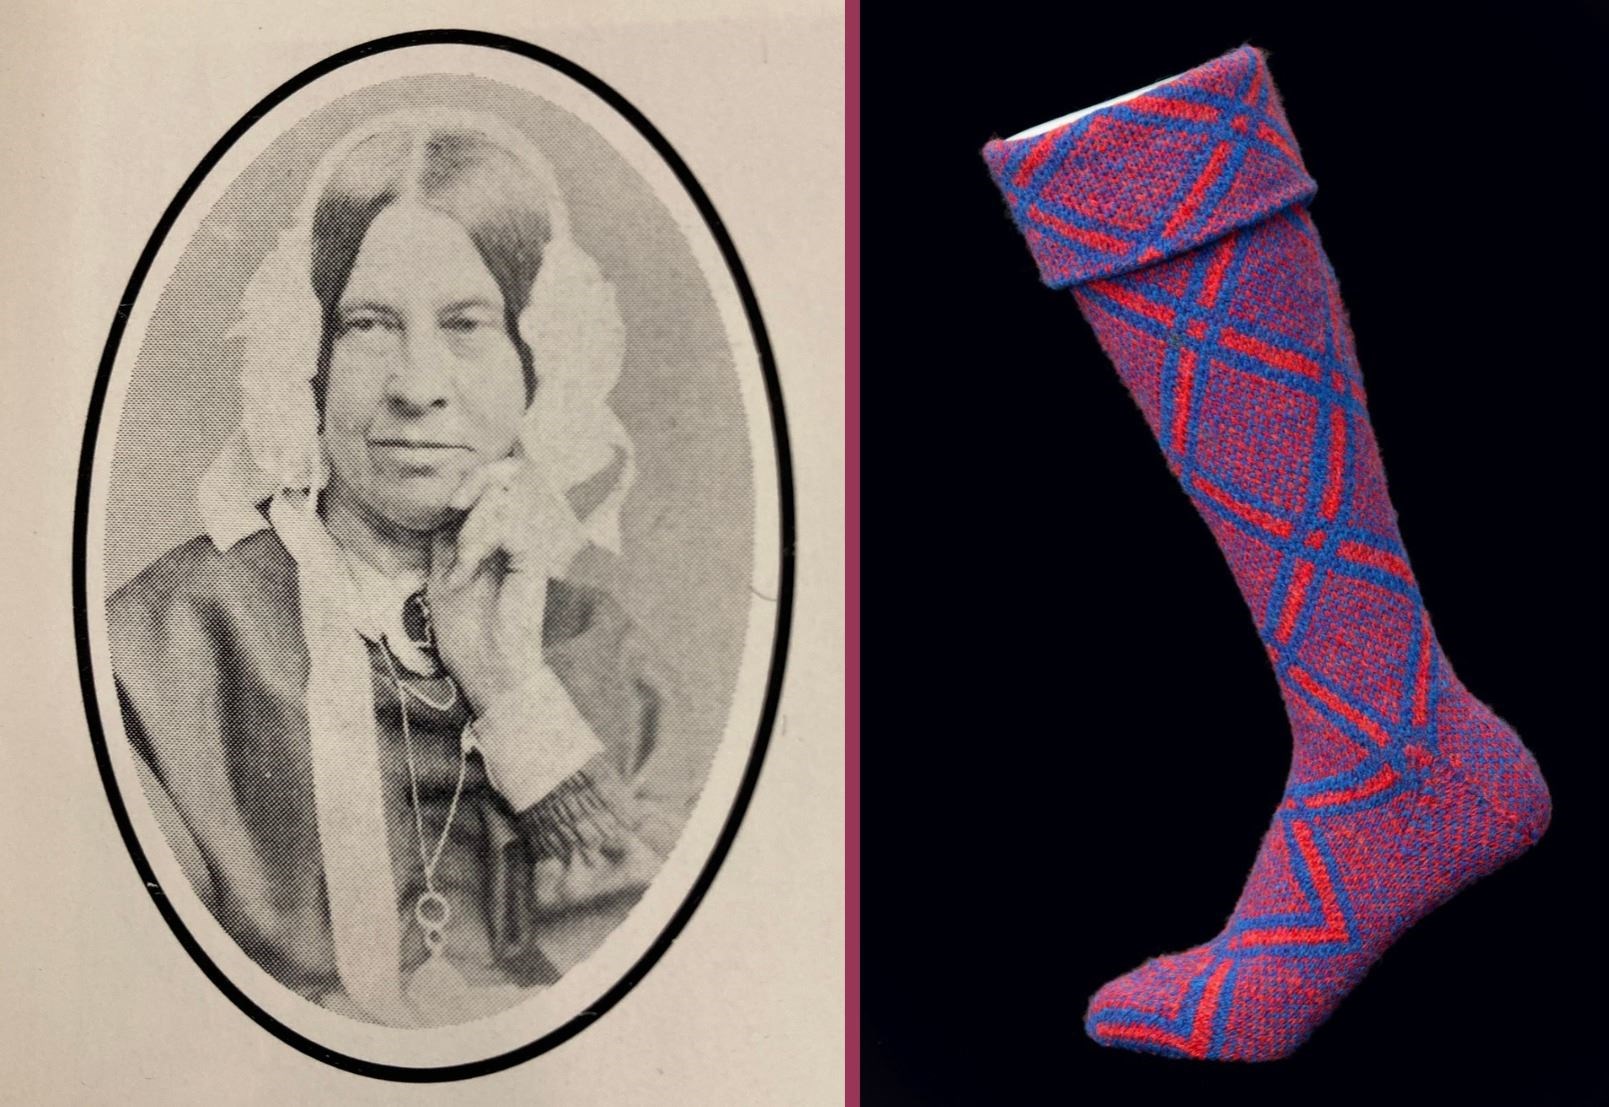 Photo 1: Lady Mackenzie, from Pigeon Holes Of Memory: The life and times of Dr. John Mackenzie. Photo 2: Gairloch Pattern Socks, as featured on Highland Threads.